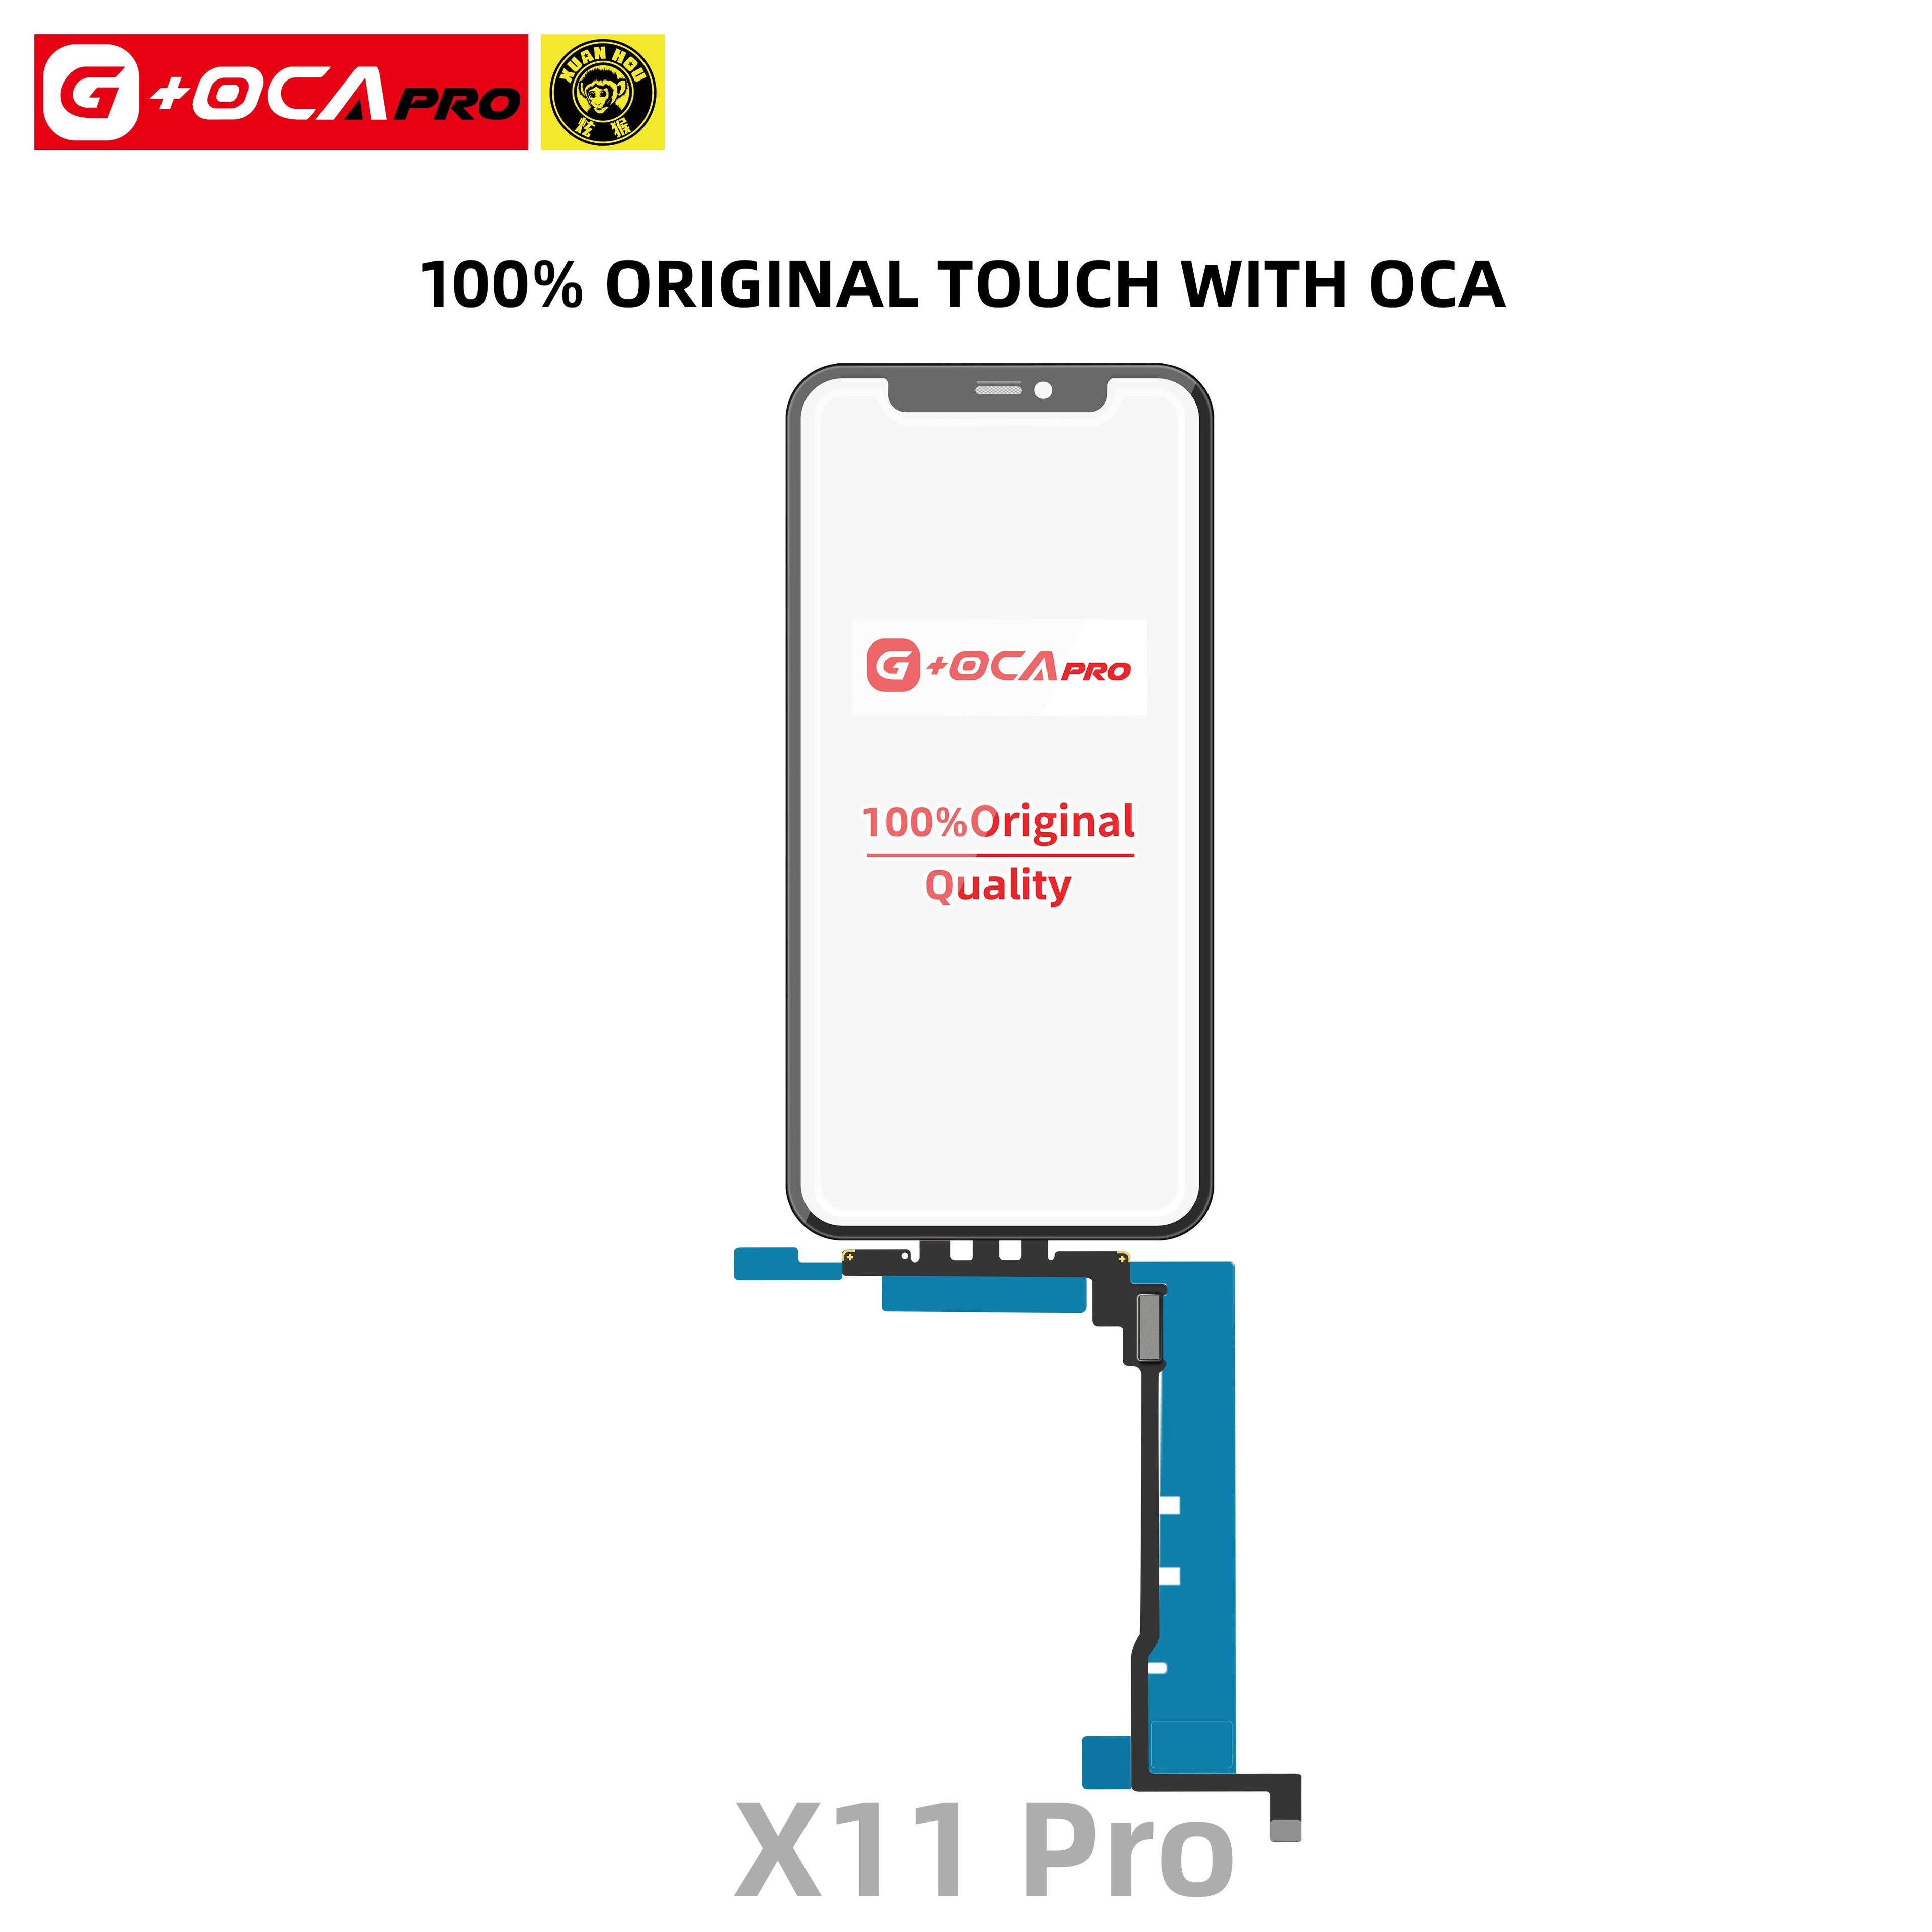 Touch Screen G + OCA Pro with original touch (with oleophobic cover) iPhone 11 Pro